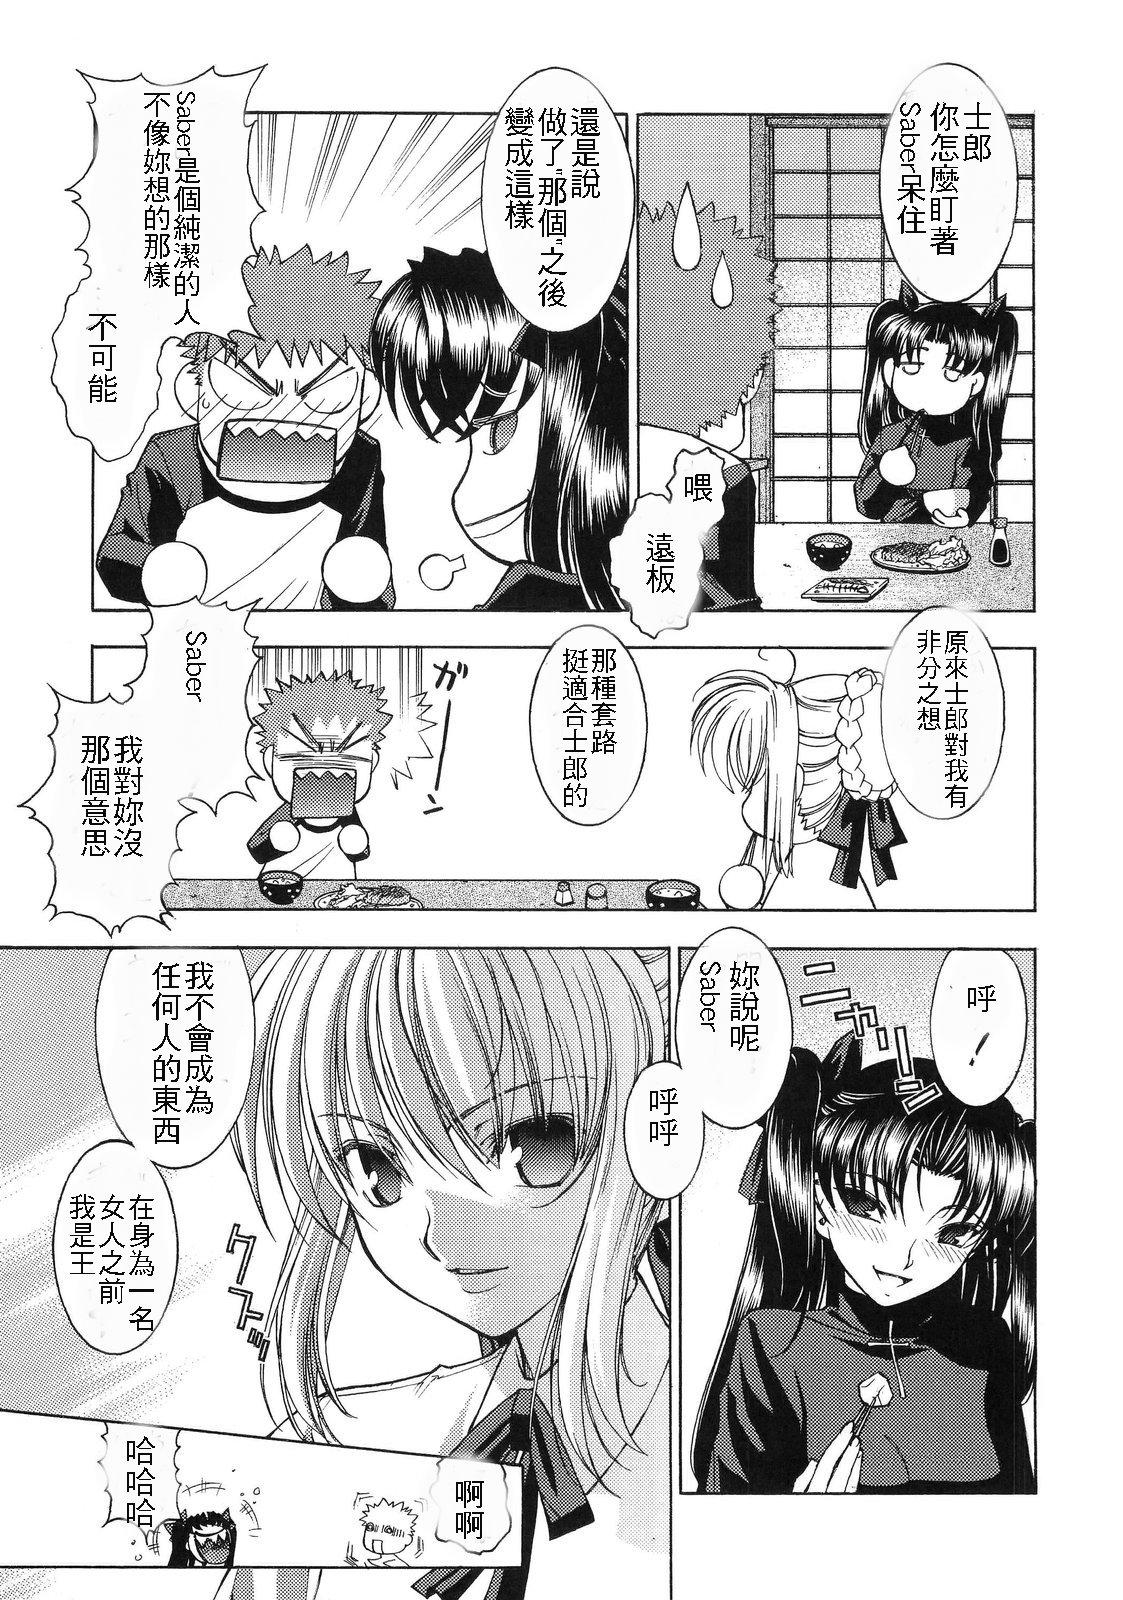 Gayemo Atomic-S - Fate stay night Sapphic - Page 4